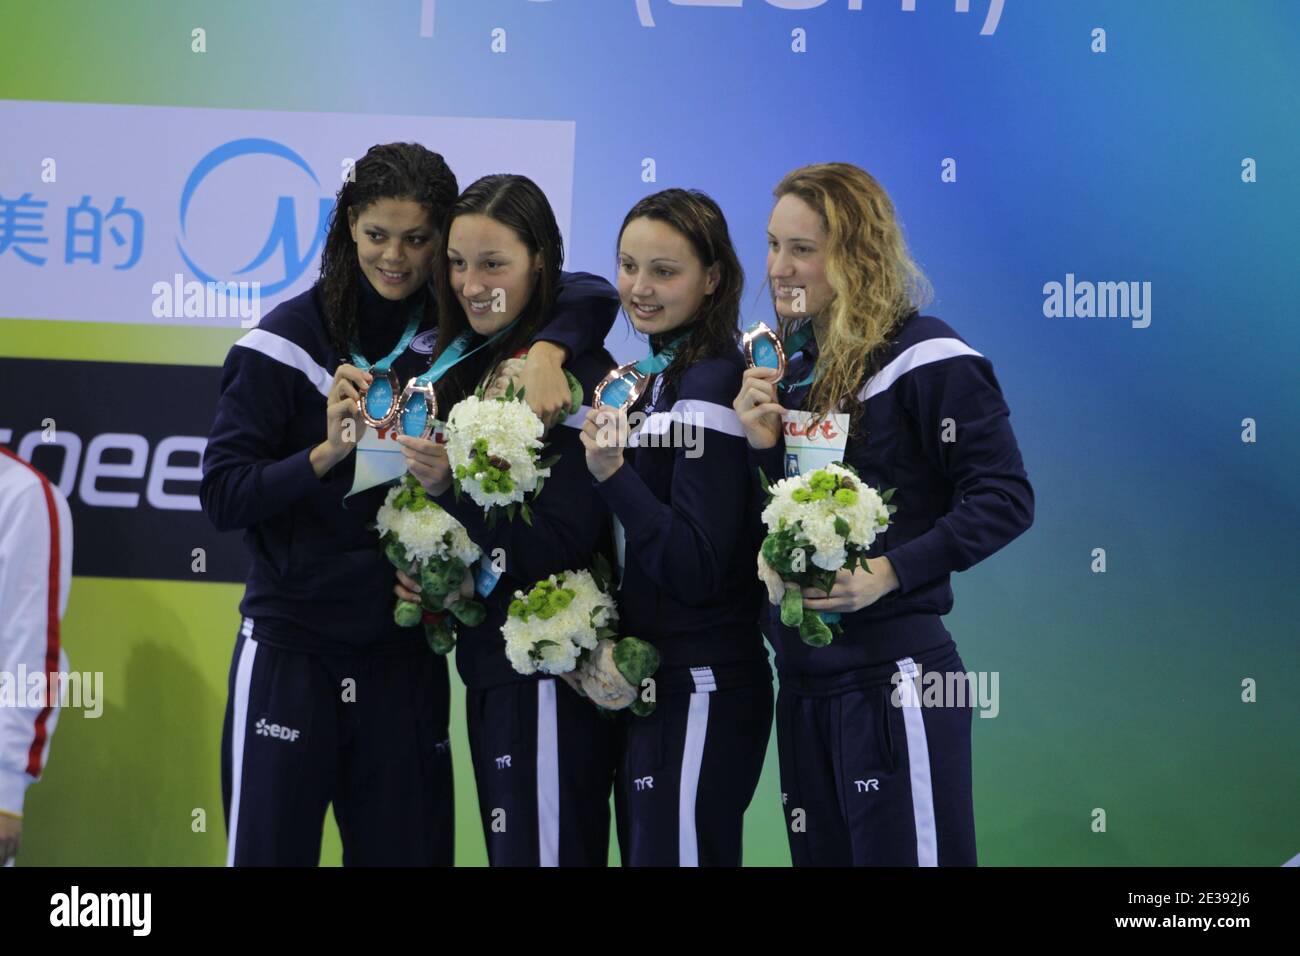 Bronze medalists Camille Muffat, Coralie Balmy, Mylene Lazare and Ophelie Cyrielle Etienne from France pose at the medal ceremony for the Women's 4x200 meter Freestyle Final during day one of the 10th FINA World Swimming Championships (25m) at the Hamdan bin Mohammed bin Rashid Sports Complex in Dubai, United Arab Emirates on December 15, 2010. Photo by Ammar Abd Rabbo/ABACAPRESS.COM Stock Photo